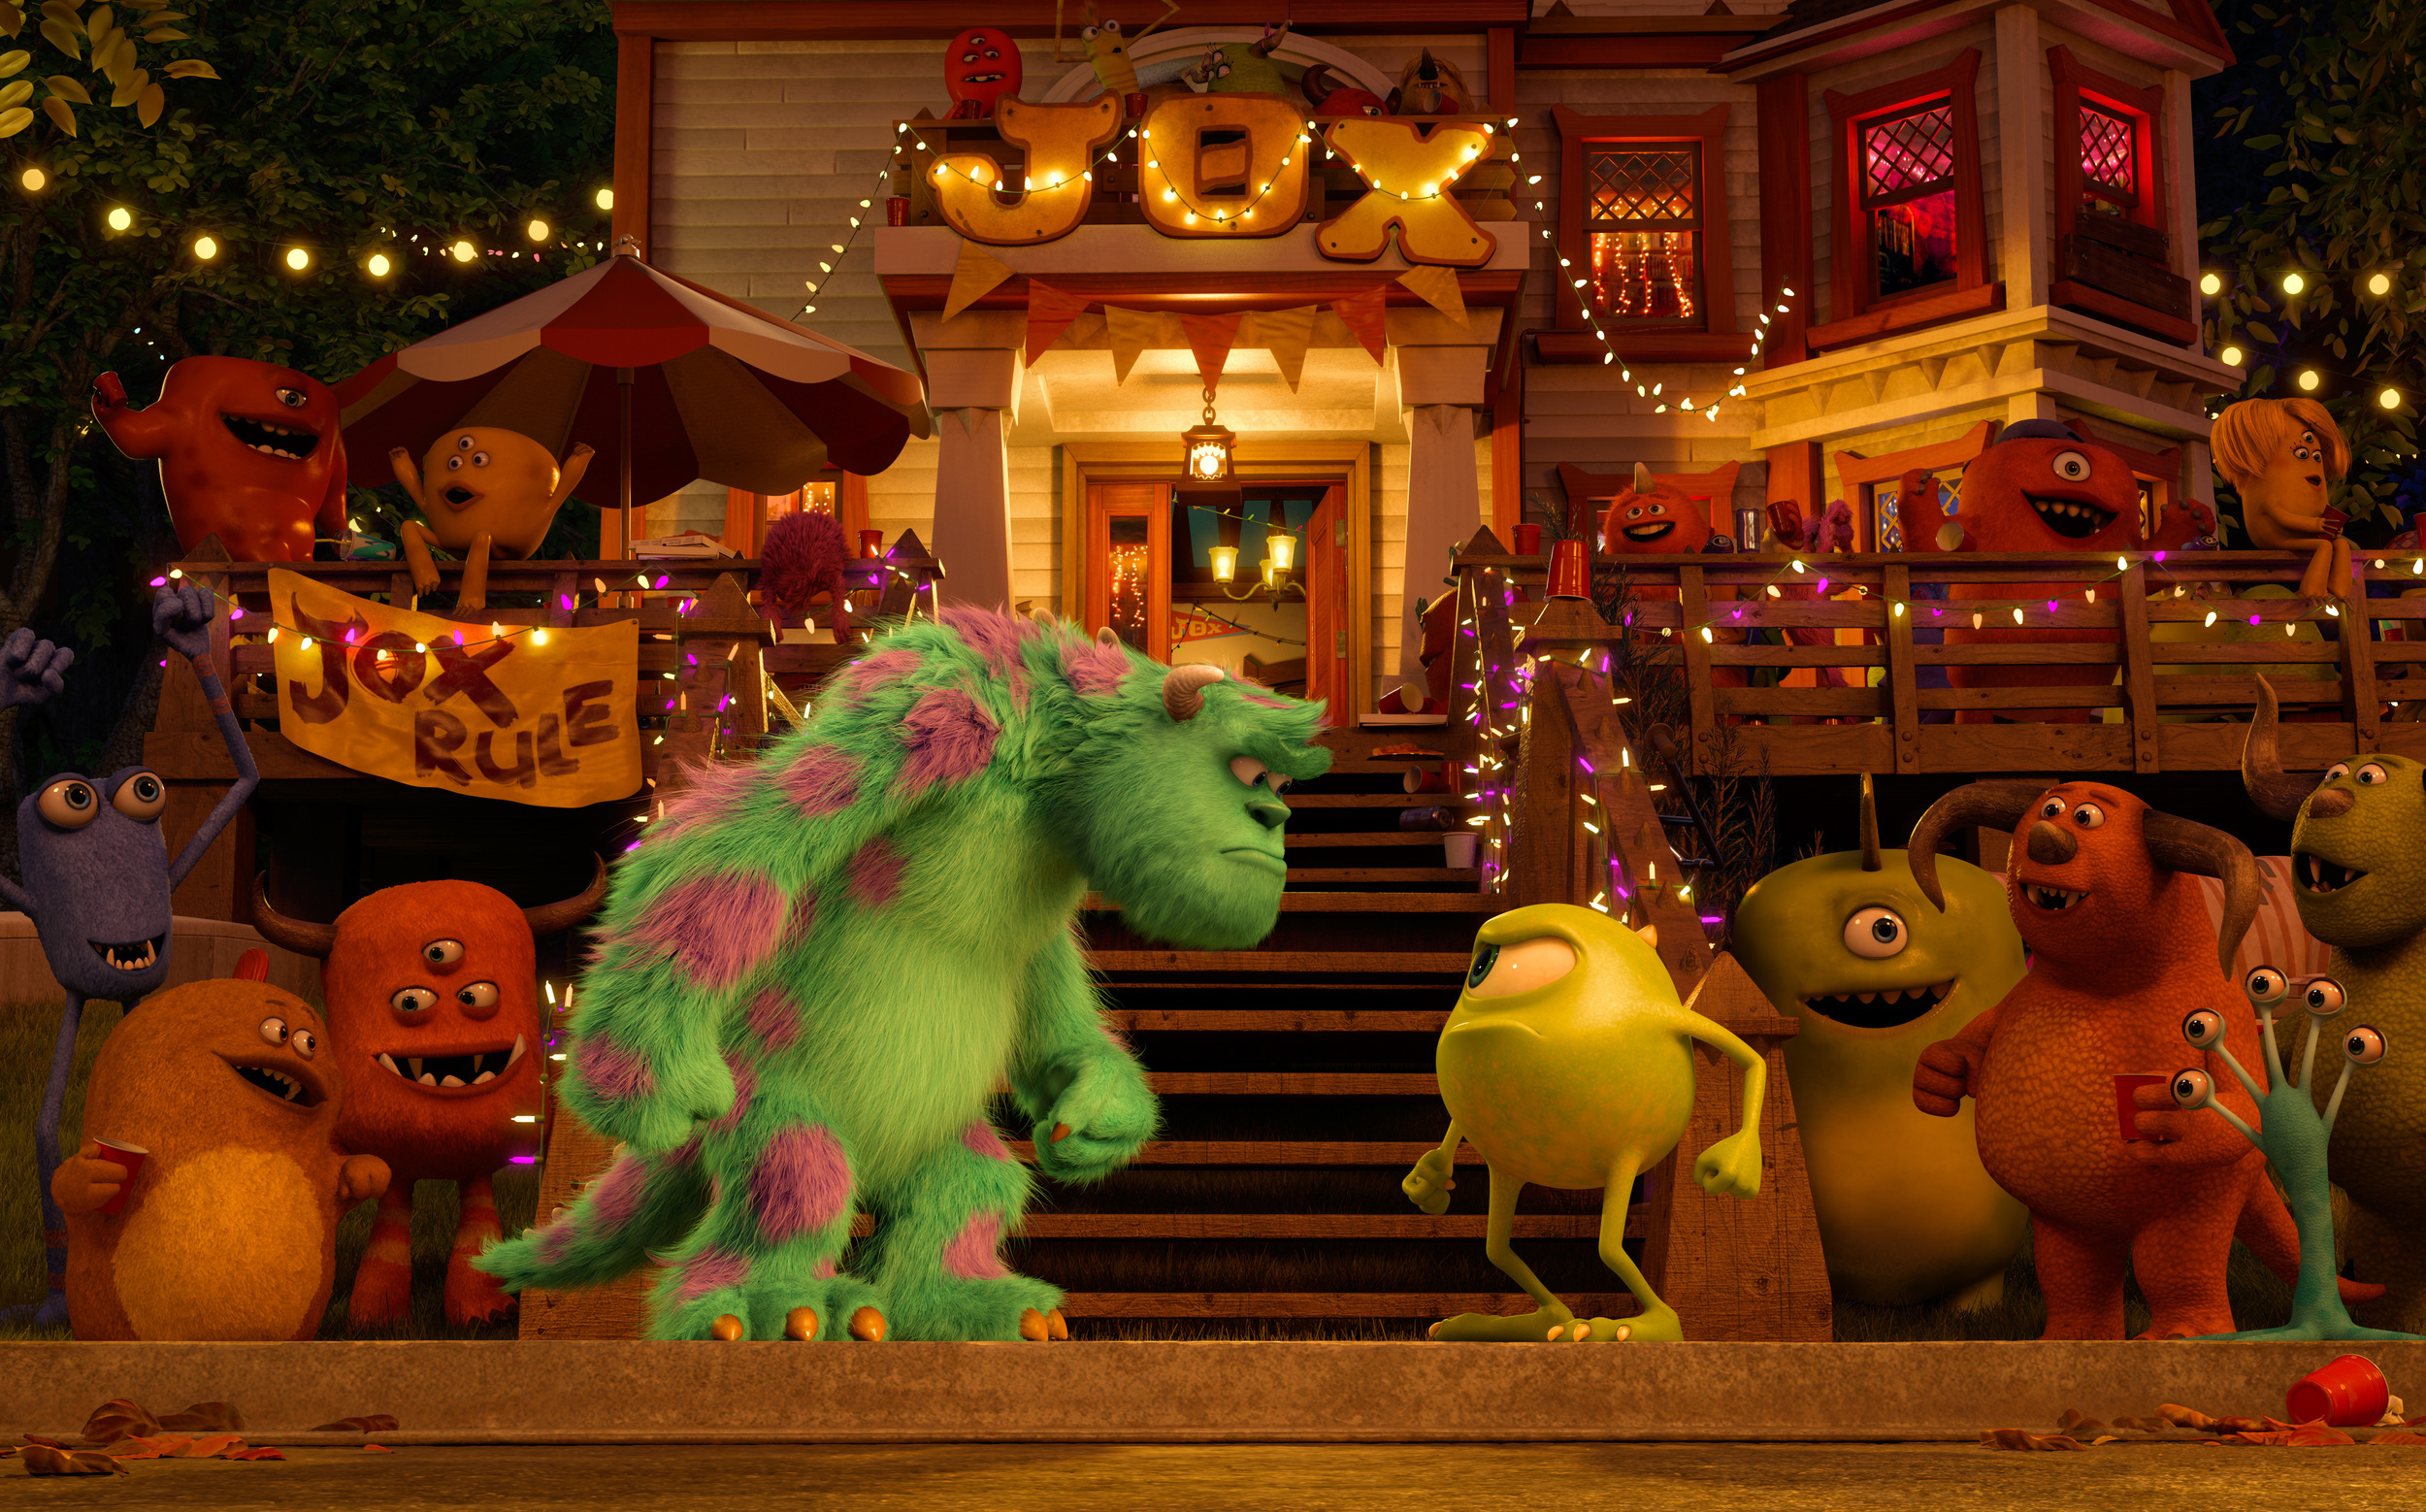 <p>We enjoy <em>Monsters University</em> more than the original <em>Monsters, Inc.</em> That may be an unpopular opinion, but we’re suckers for college comedies, and this prequel also features a fraternity element as Sulley, Mike, and their Oozma Kappa brothers compete to be the top scarers at the titular school. In addition to the returns of Billy Crystal, John Goodman, and Steve Buscemi, this movie adds a who’s-who of notable names, including Charlie Day, Nathan Fillion, Dave Foley, Bill Hader, Sean Hayes, Bonnie Hunt, John Krasinksi, Tyler Labine, Helen Mirren, Alfred Molina, Bobby Moynihan, Aubrey Plaza, John Ratzenberger, and Julia Sweeney.</p><p>You may also like: <a href='https://www.yardbarker.com/entertainment/articles/the_most_memorable_tv_shows_set_in_dystopian_worlds/s1__35858798'>The most memorable TV shows set in dystopian worlds</a></p>